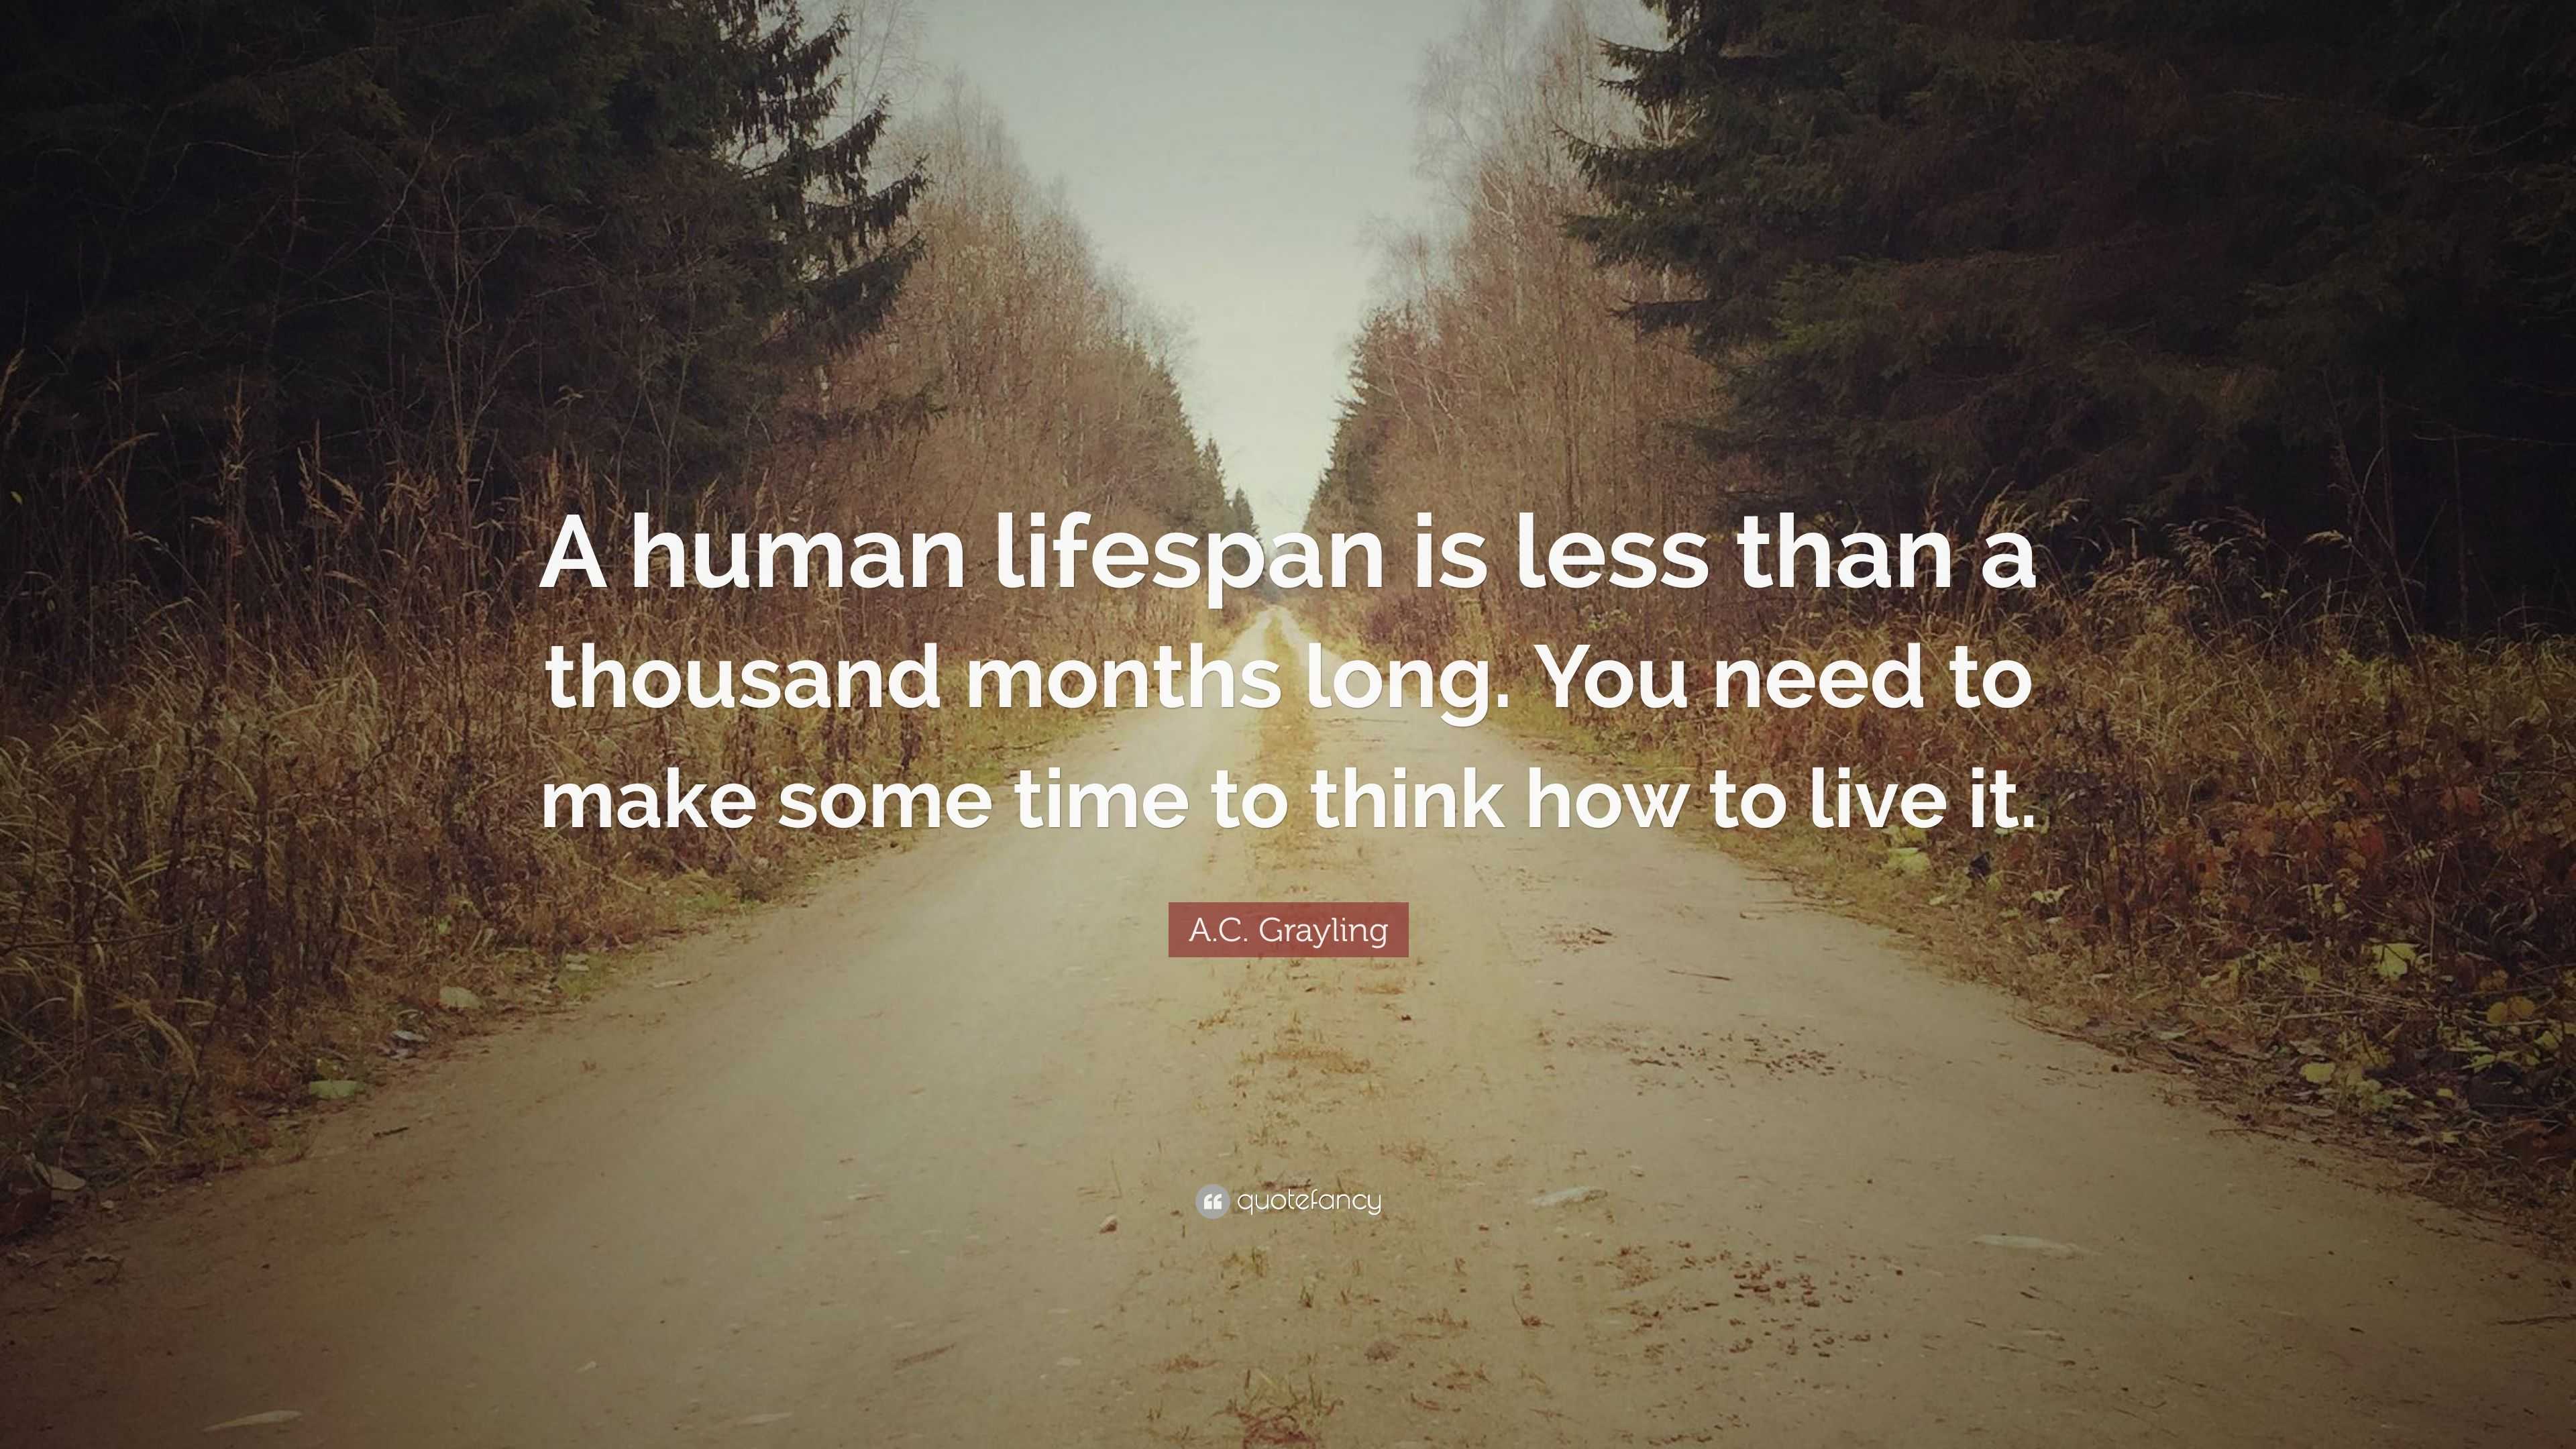 A.C. Grayling Quote: “A human lifespan is less than a thousand months